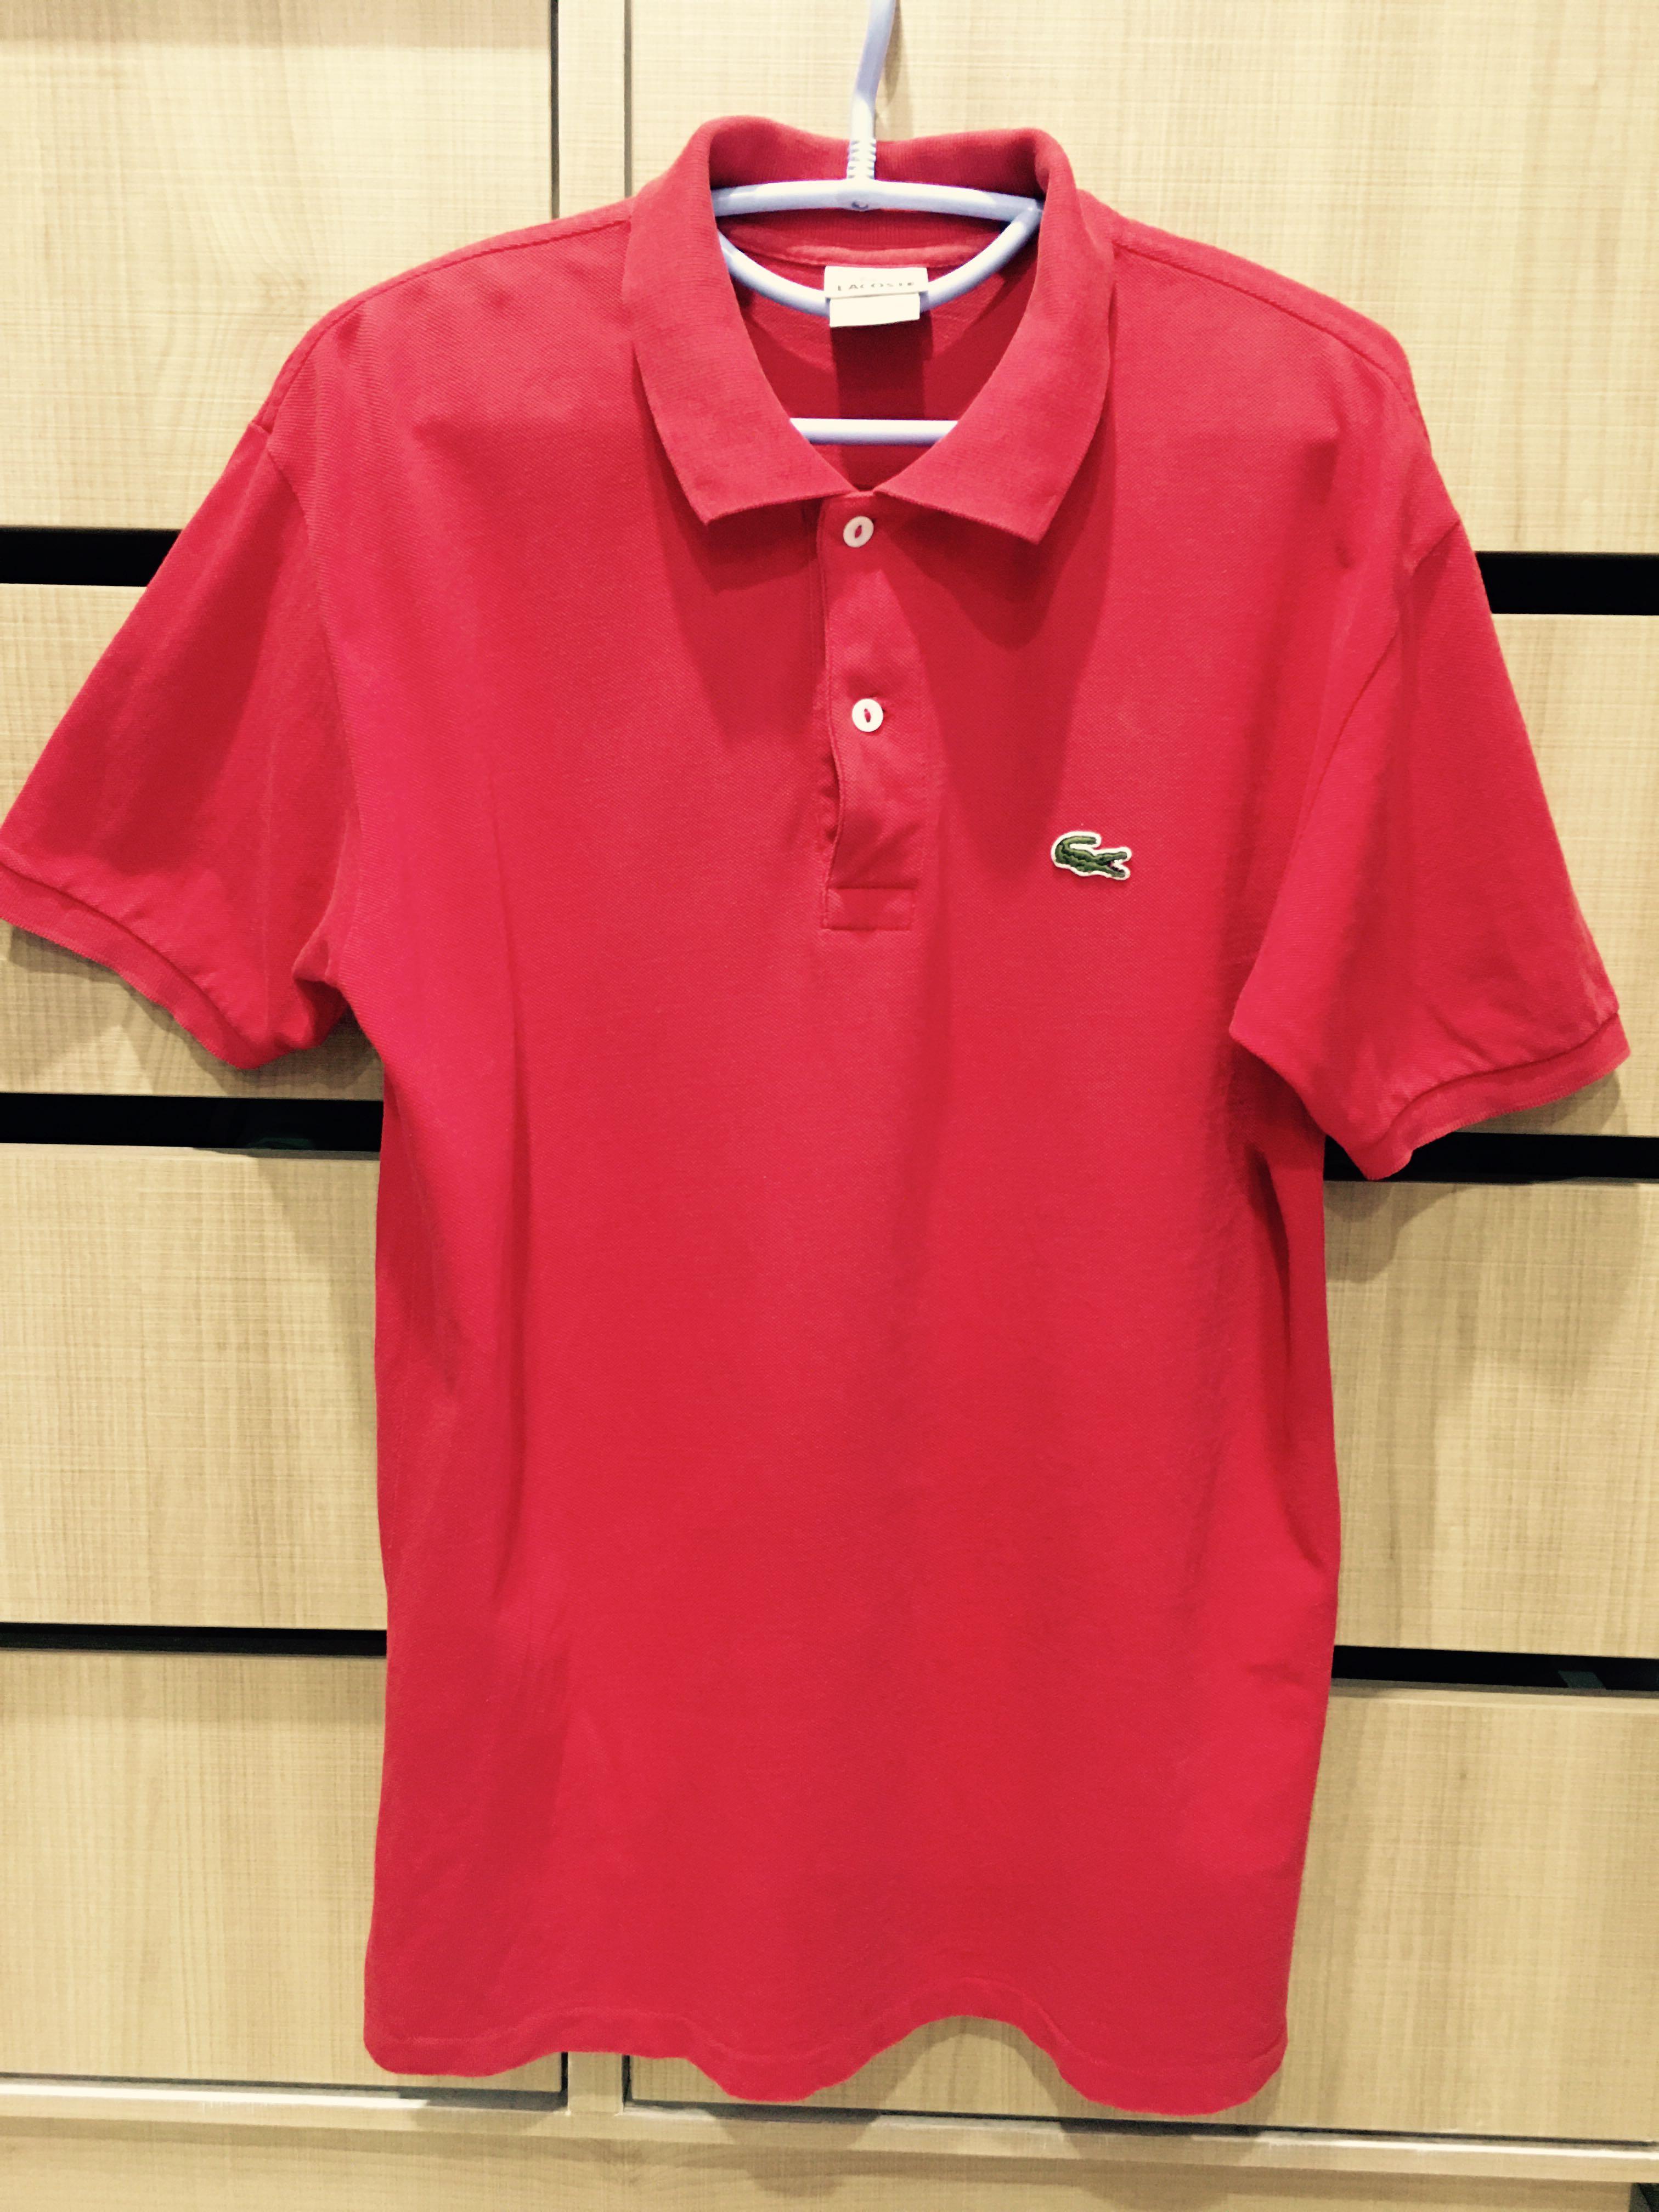 Lacoste polo tee red size 4, Men's 